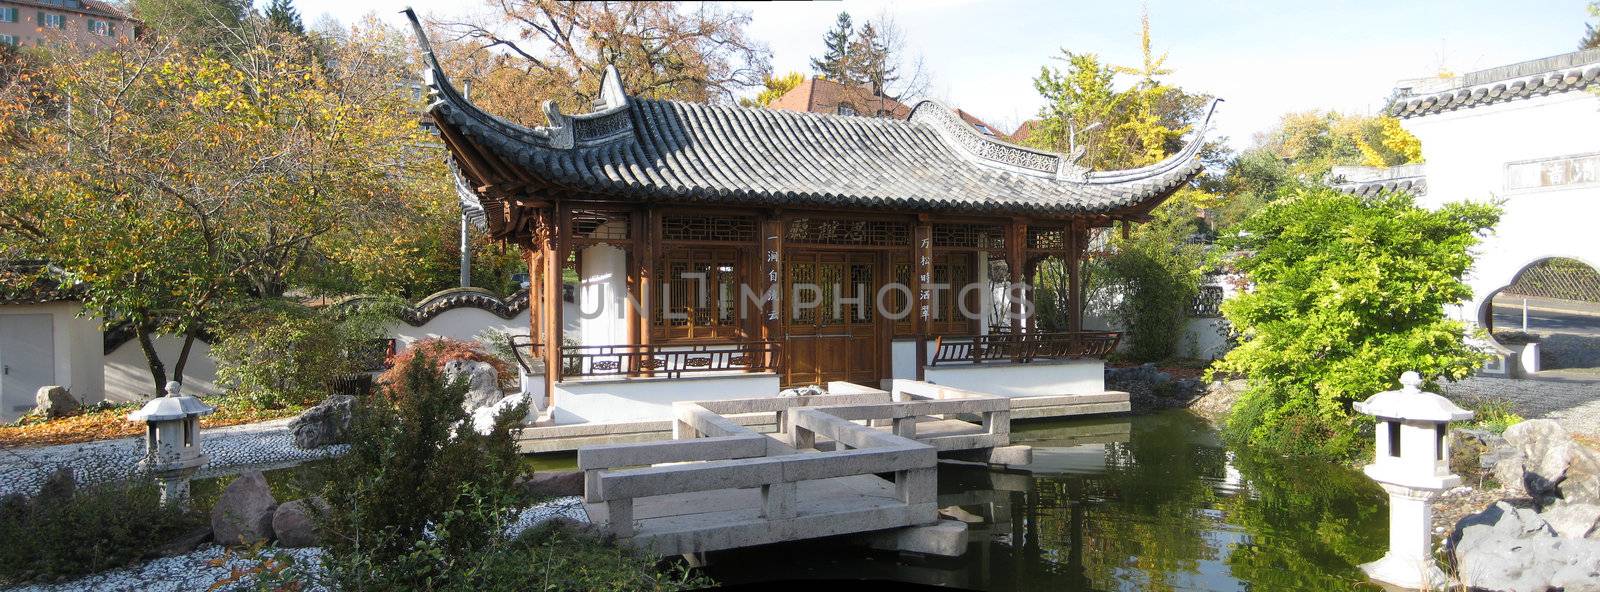 panorama scene of a typical chinese garden with tempel house